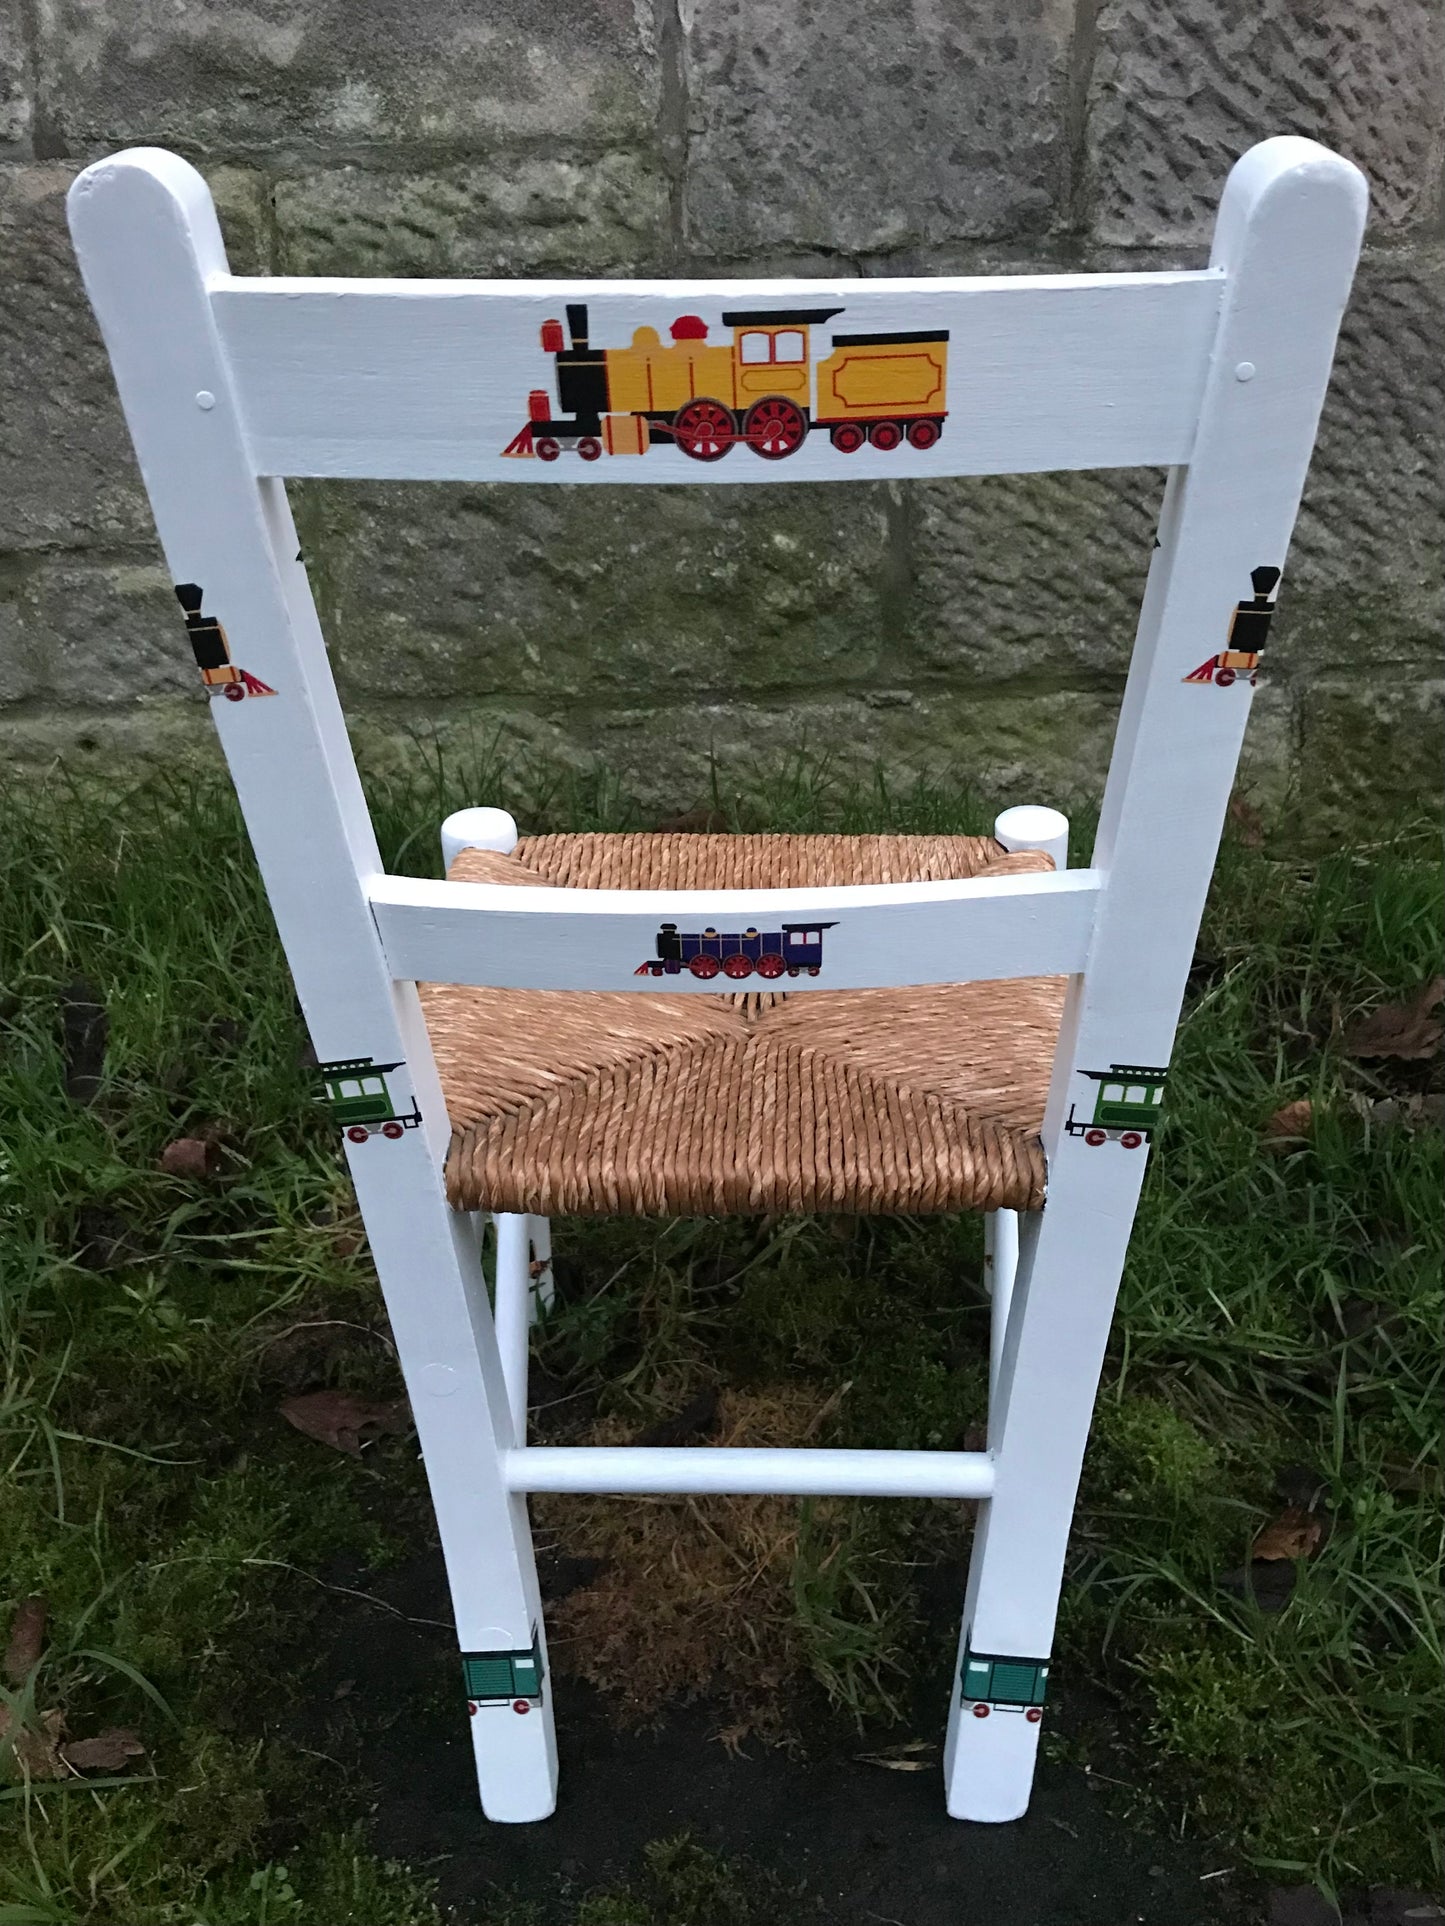 Rush seat personalised children's chair - Vintage Train theme - made to order